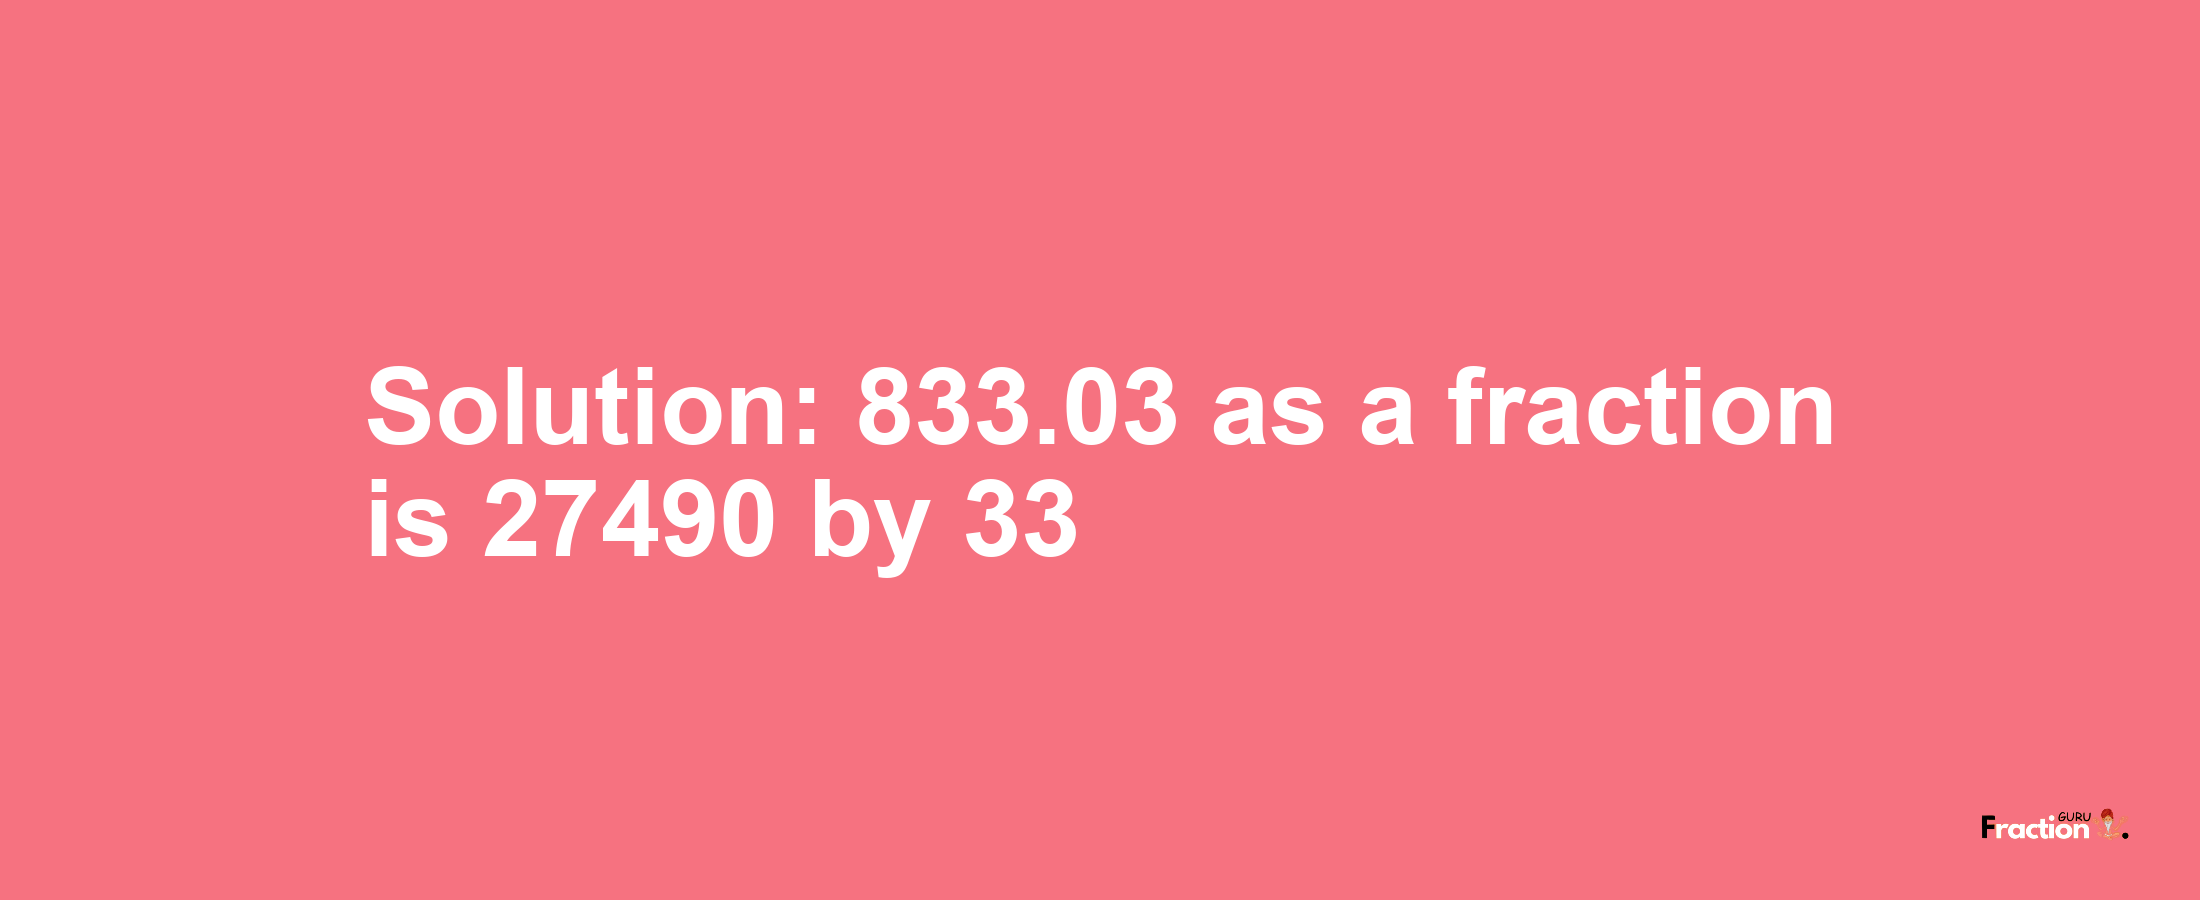 Solution:833.03 as a fraction is 27490/33